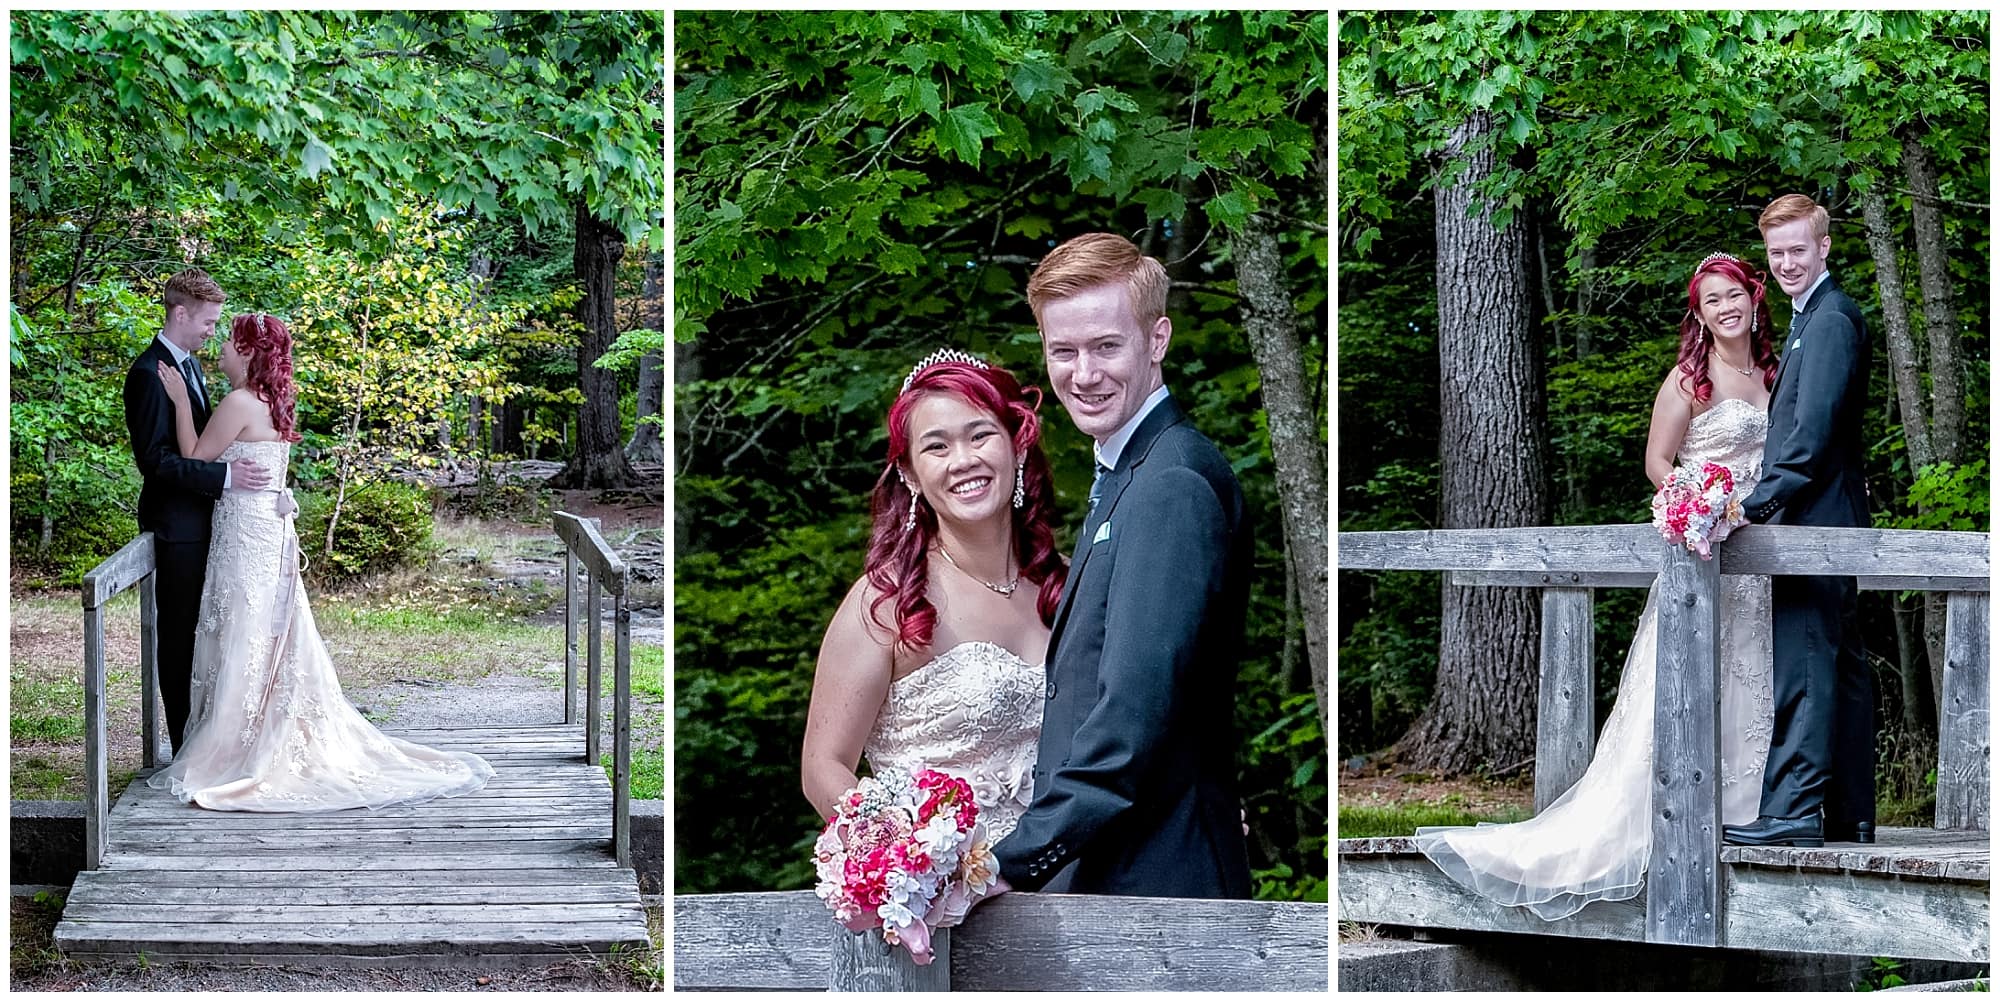 The bride and groom have their wedding photos done at Point Pleasant Park in Halifax, NS.